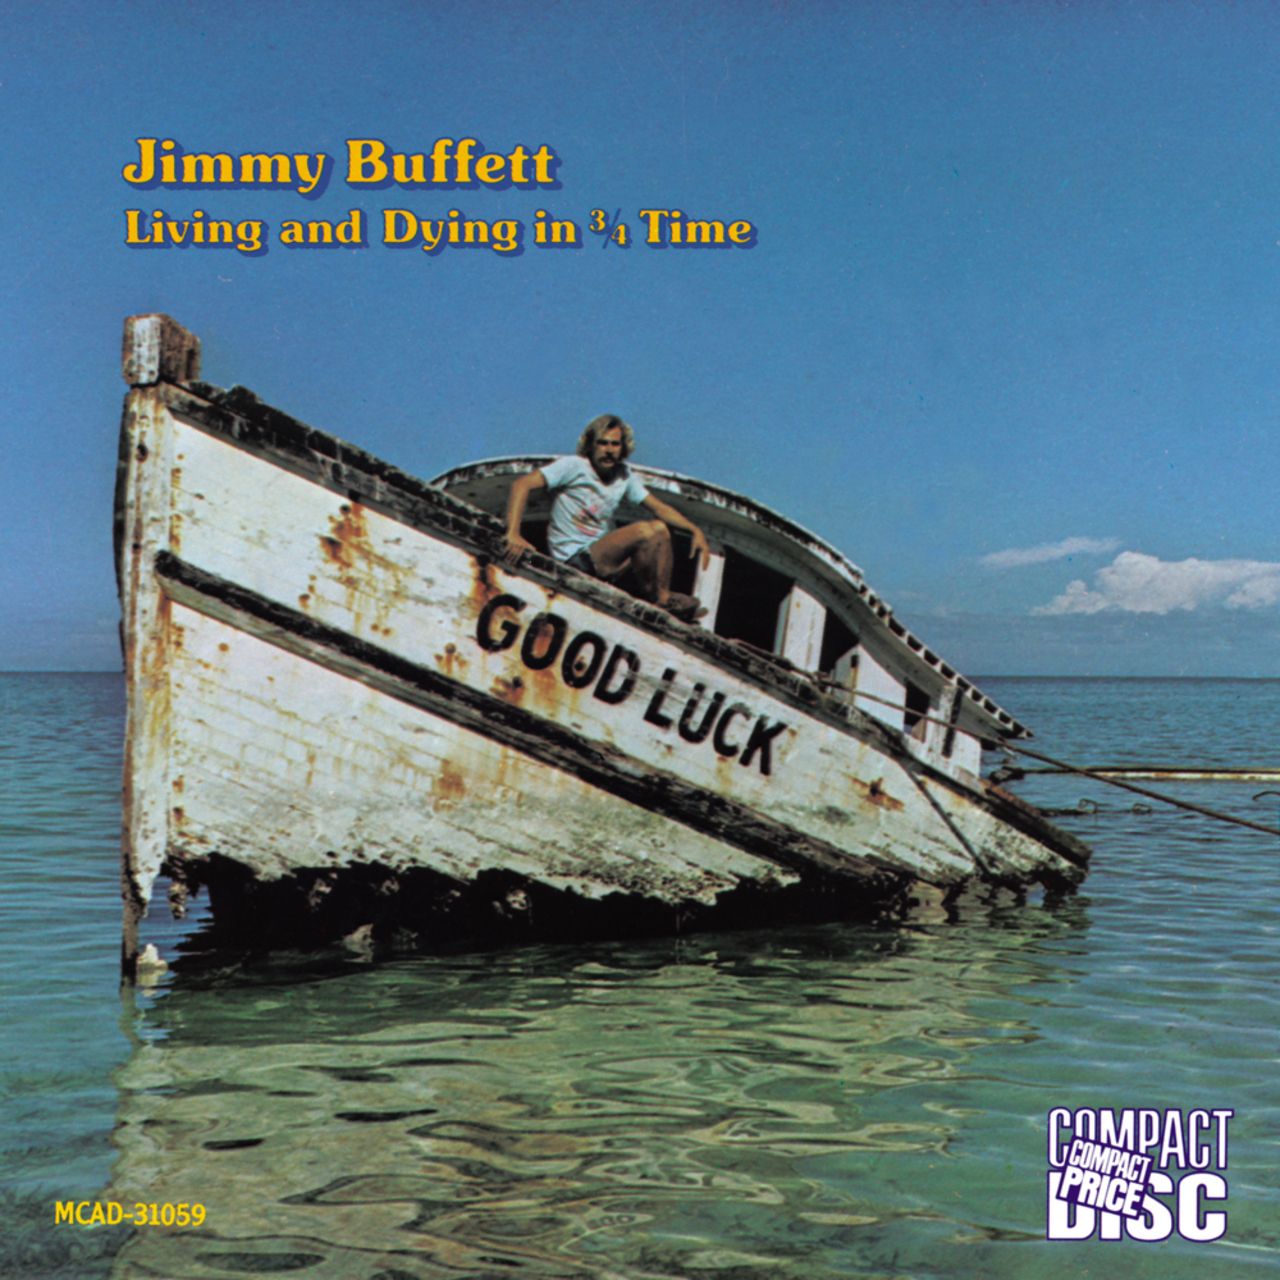 Art for Come Monday by Jimmy Buffett